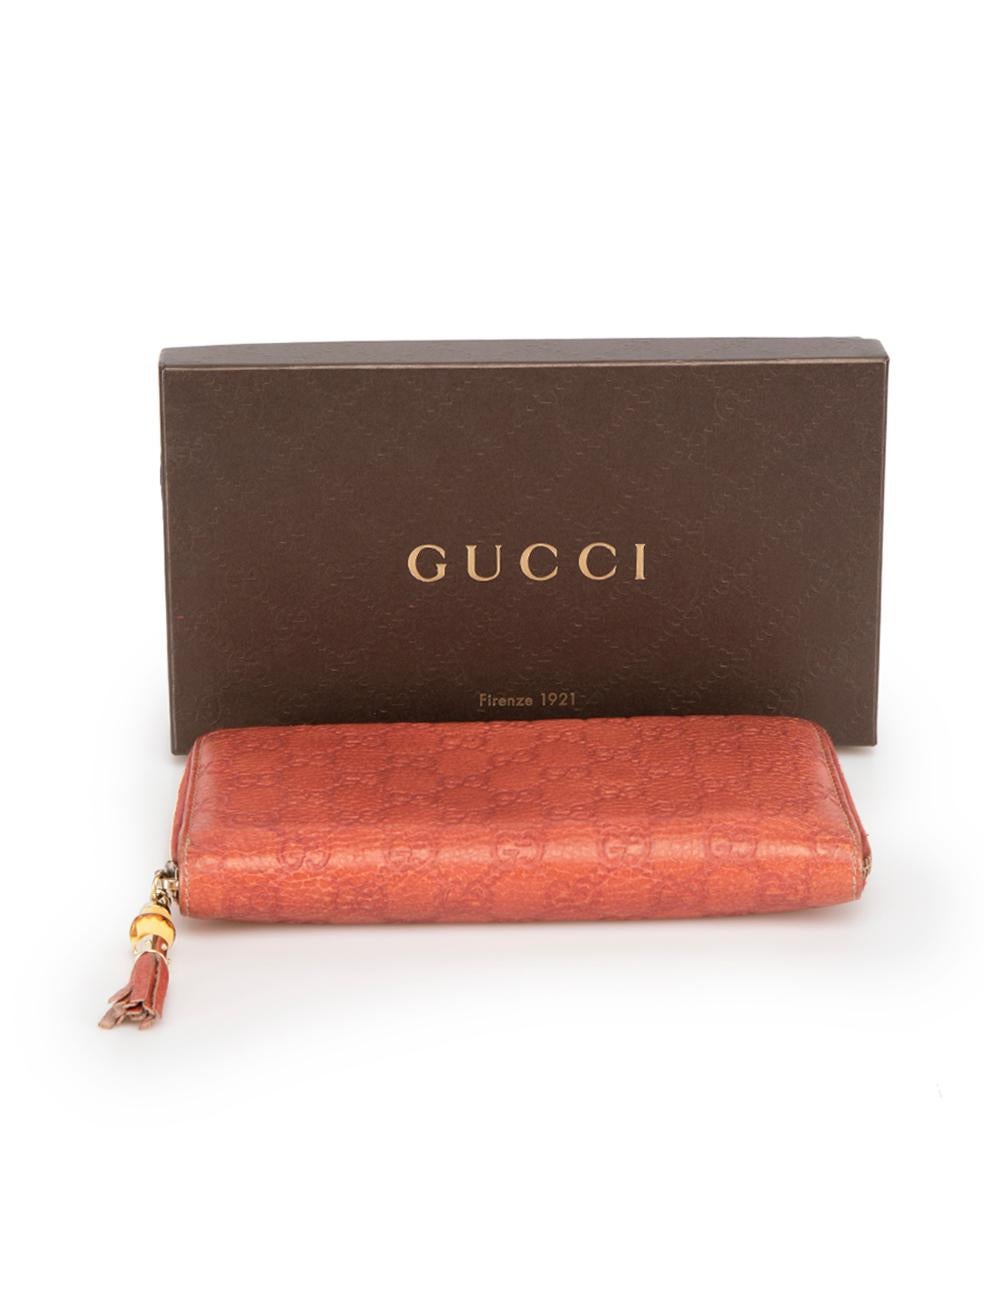 Gucci Women's Red Leather GG Guccisima Continental Wallet 3